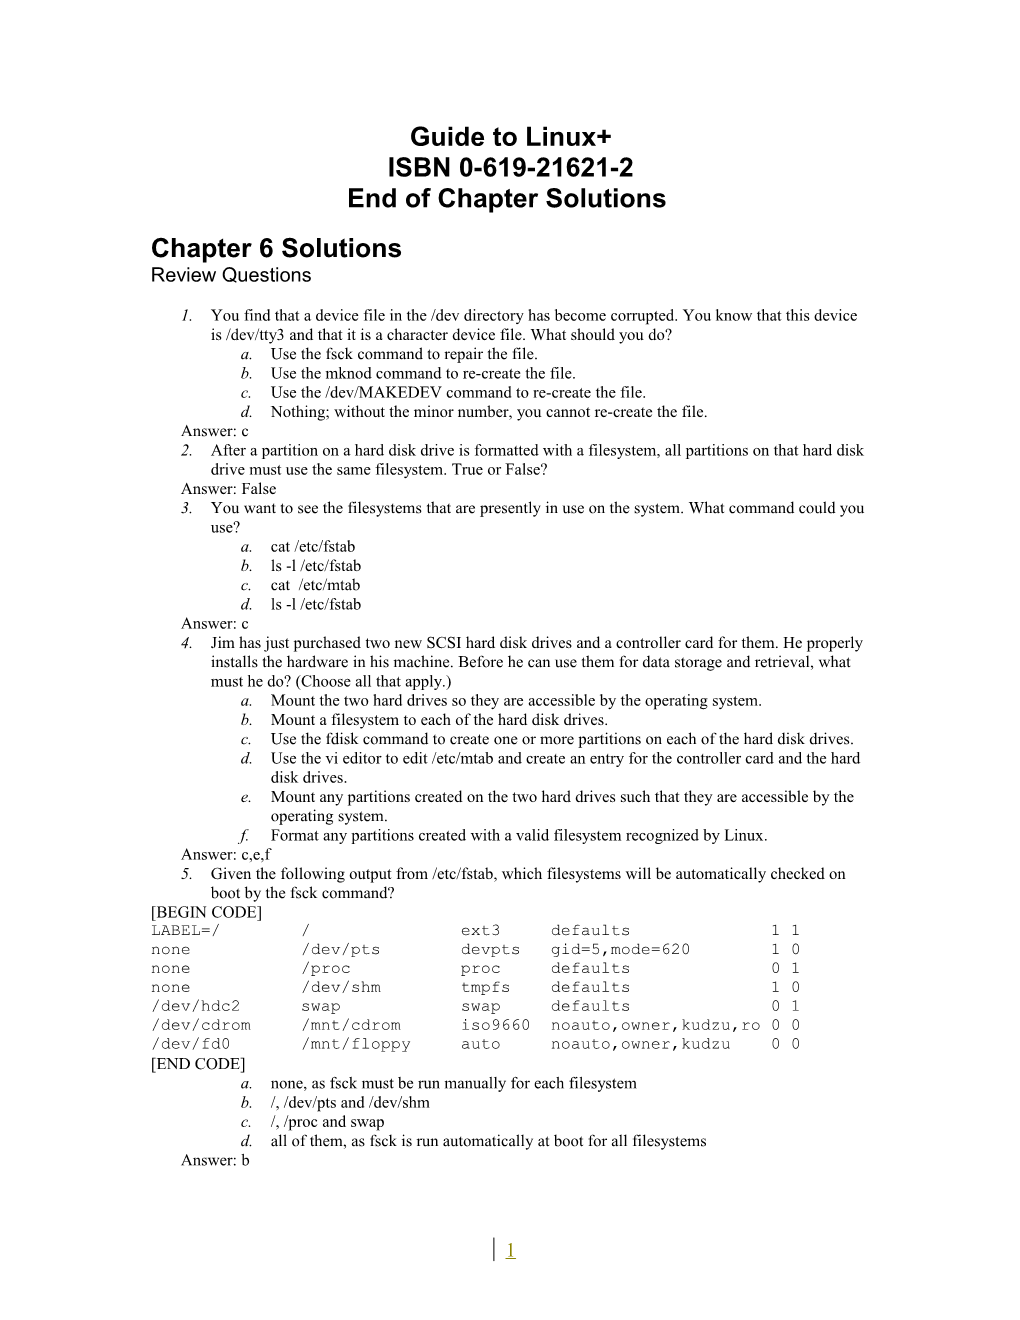 End of Chapter Solutions Template s2